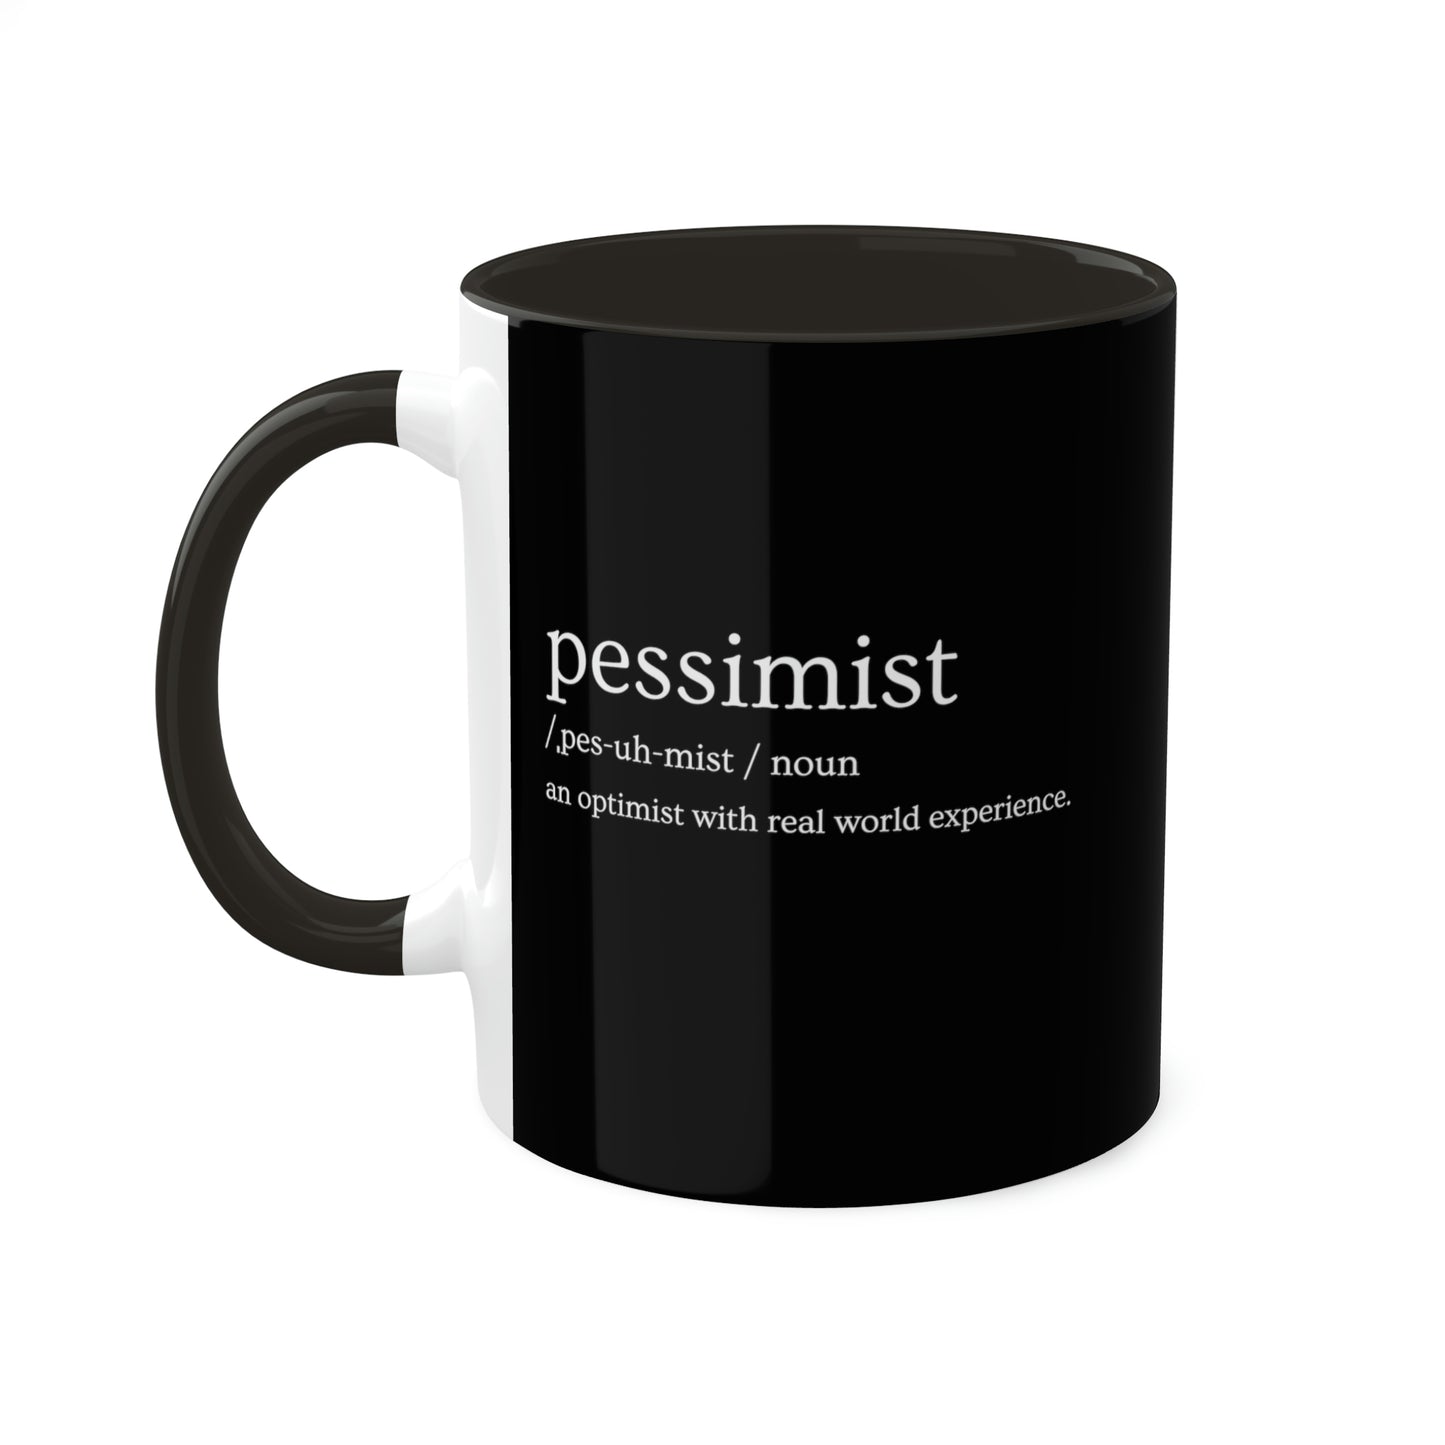 pessimist-definition-an-optimist-with-real-world-experience-glossy-mug-11-oz-orca-coating-left-view